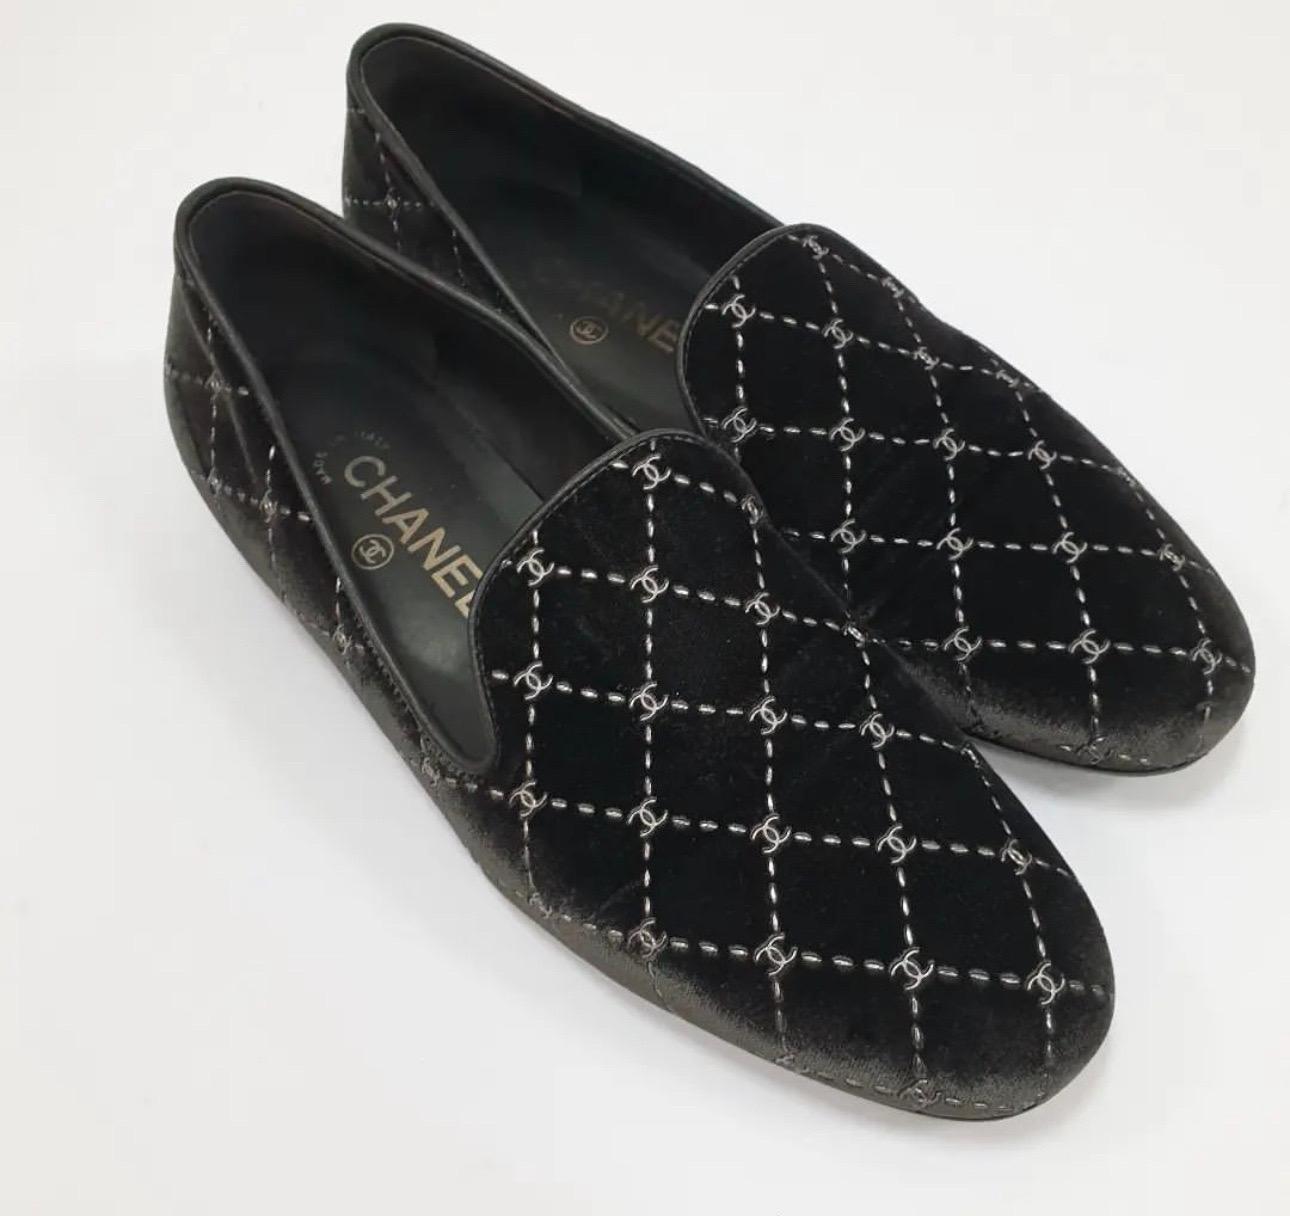 Chanel Velvet Loafers
From the 2017 Collection by Karl Lagerfeld
Black
Interlocking CC Logo
Semi-Pointed Toes
Sz.38.5
No box. No dust bAG